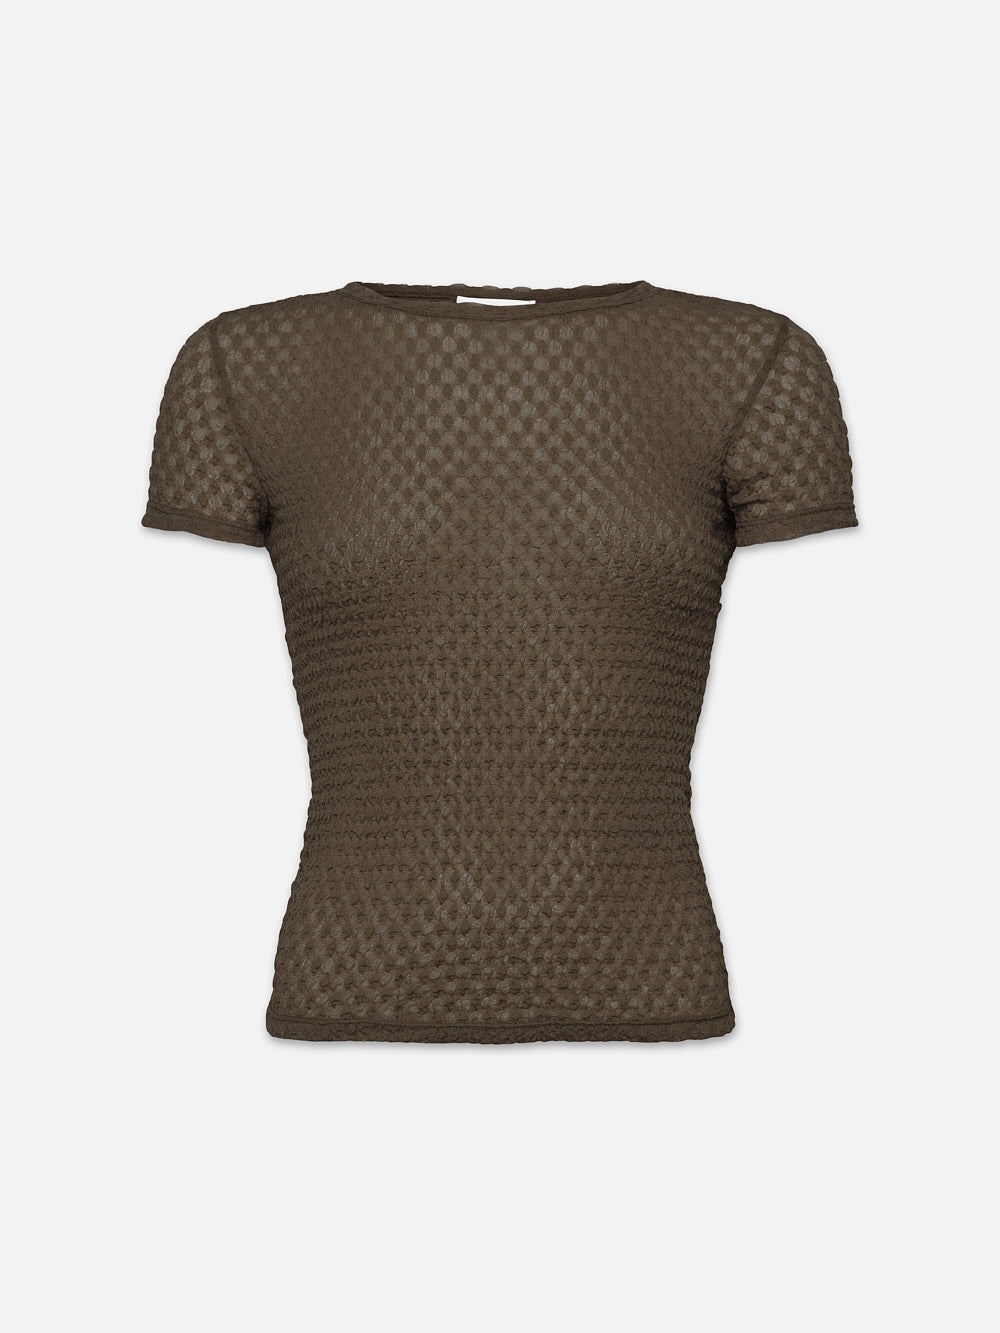 Mesh Lace Baby Tee in Cypress - 1